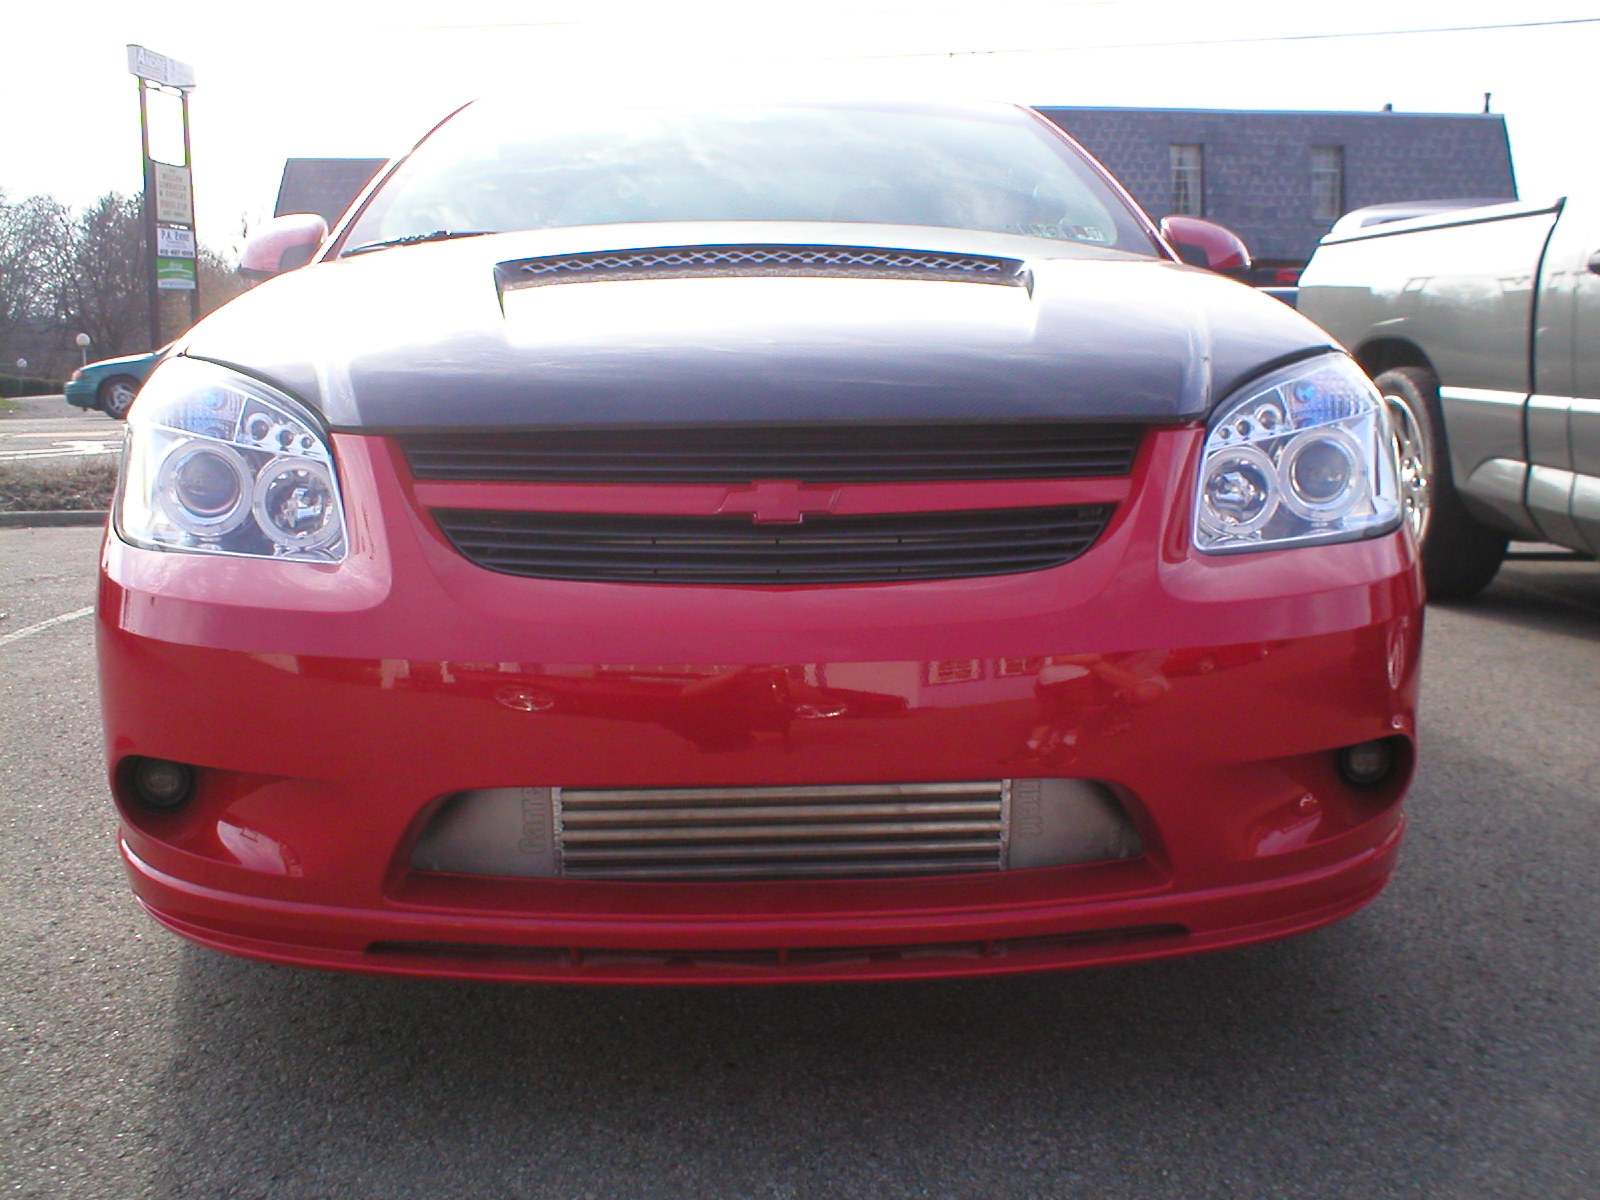 Chevrolet Cobalt SS Turbocharged Coupe